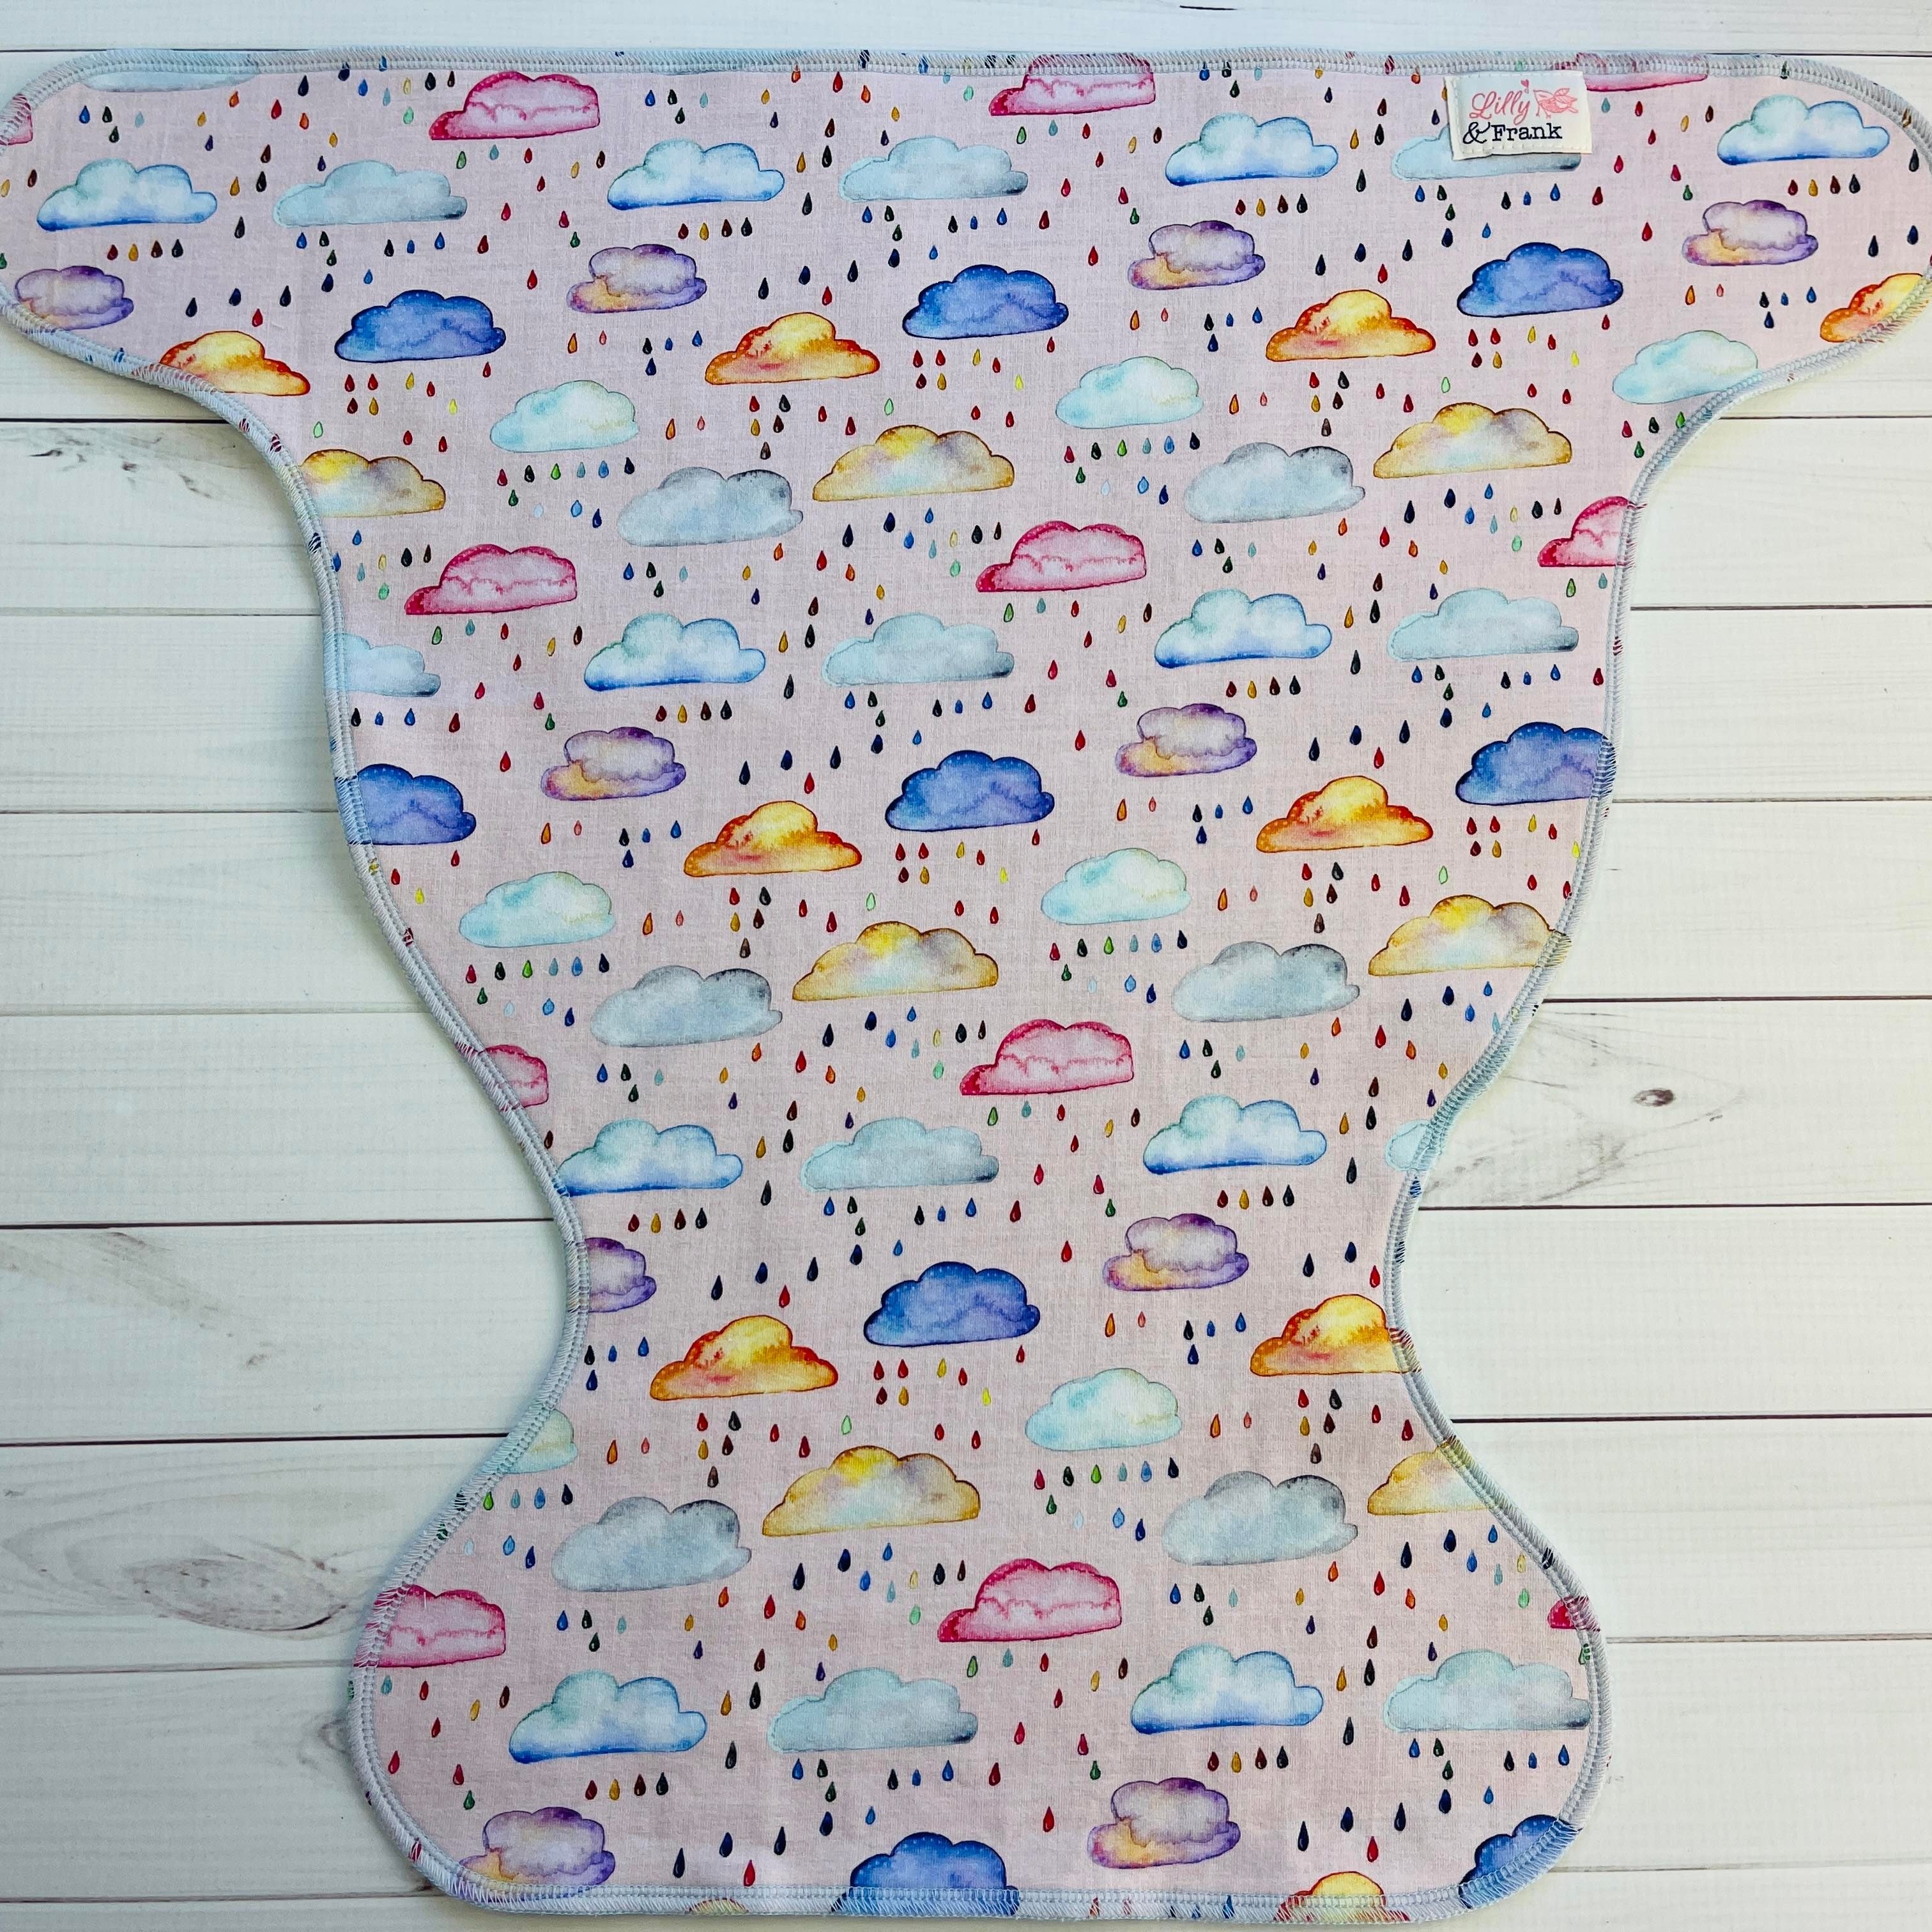 Lilly & Frank Flat Cloth Diaper Rainbow Clouds (Coming Soon!) One Size Contour Flat